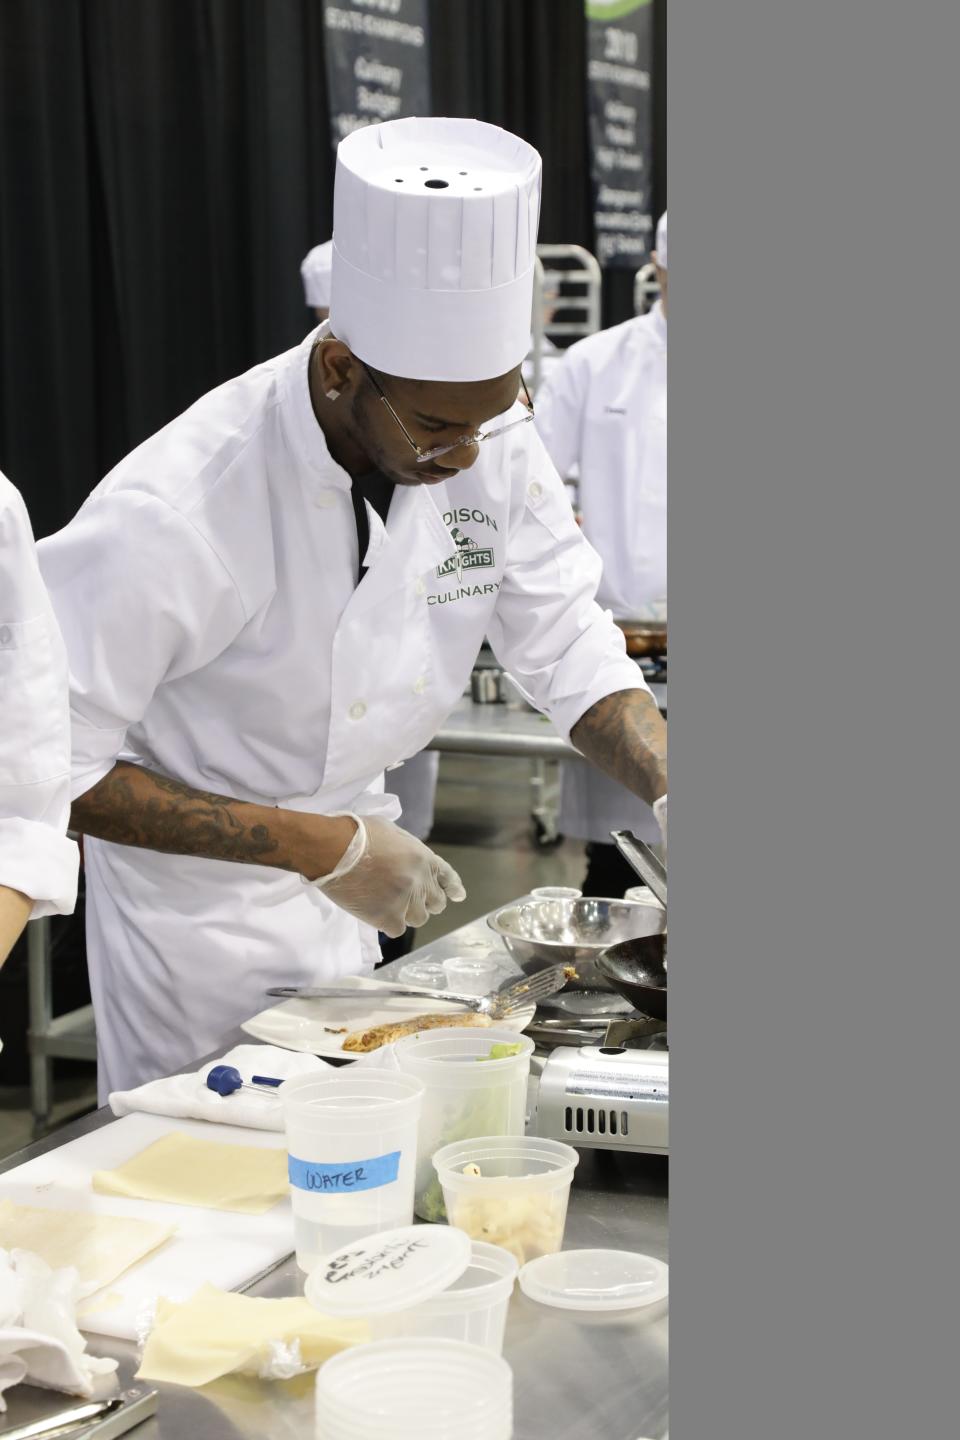 Students participate in the annual Wisconsin ProStart Invitational competition. ProStart encourages students to learn about restaurant careers.